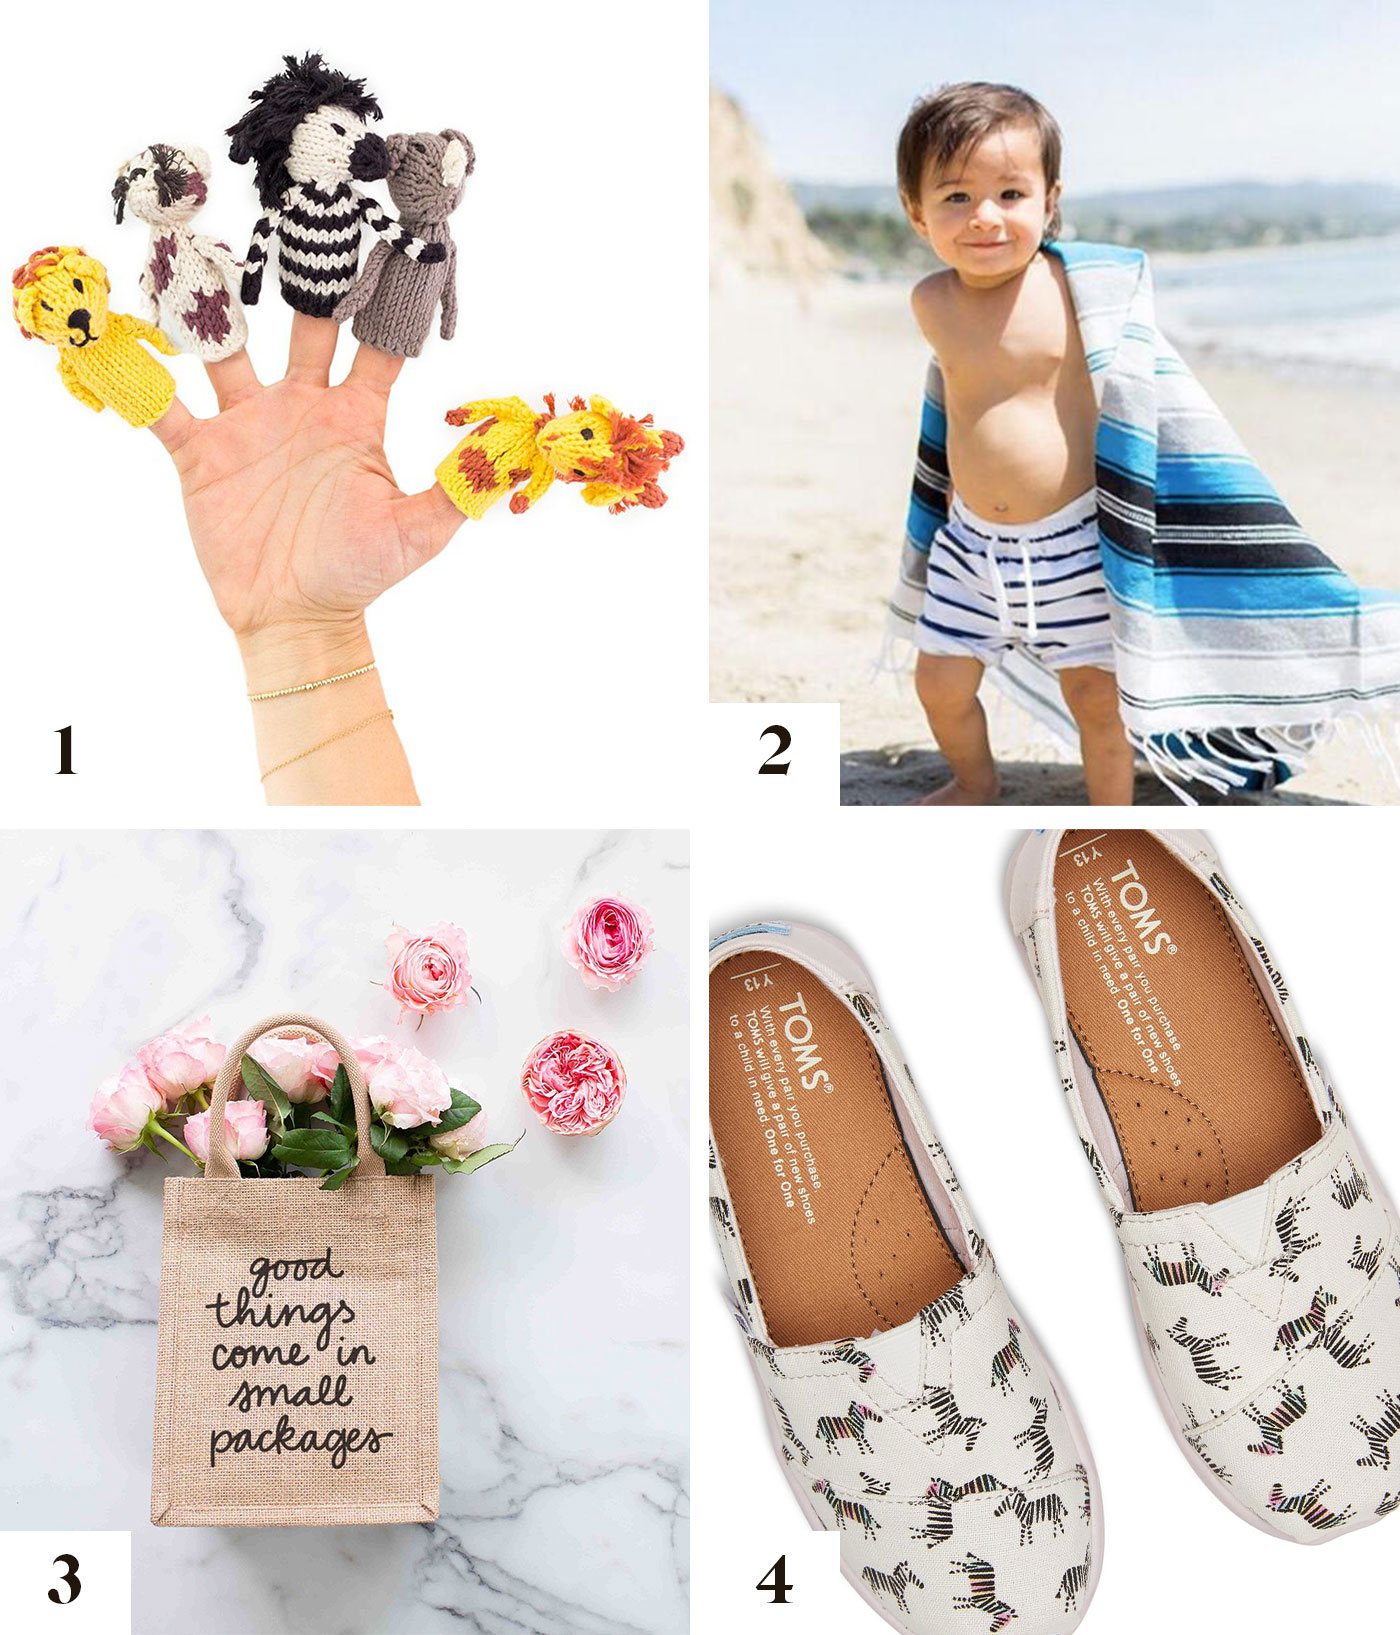 Mindful Gifts for Flower Girls + Ring Bearers